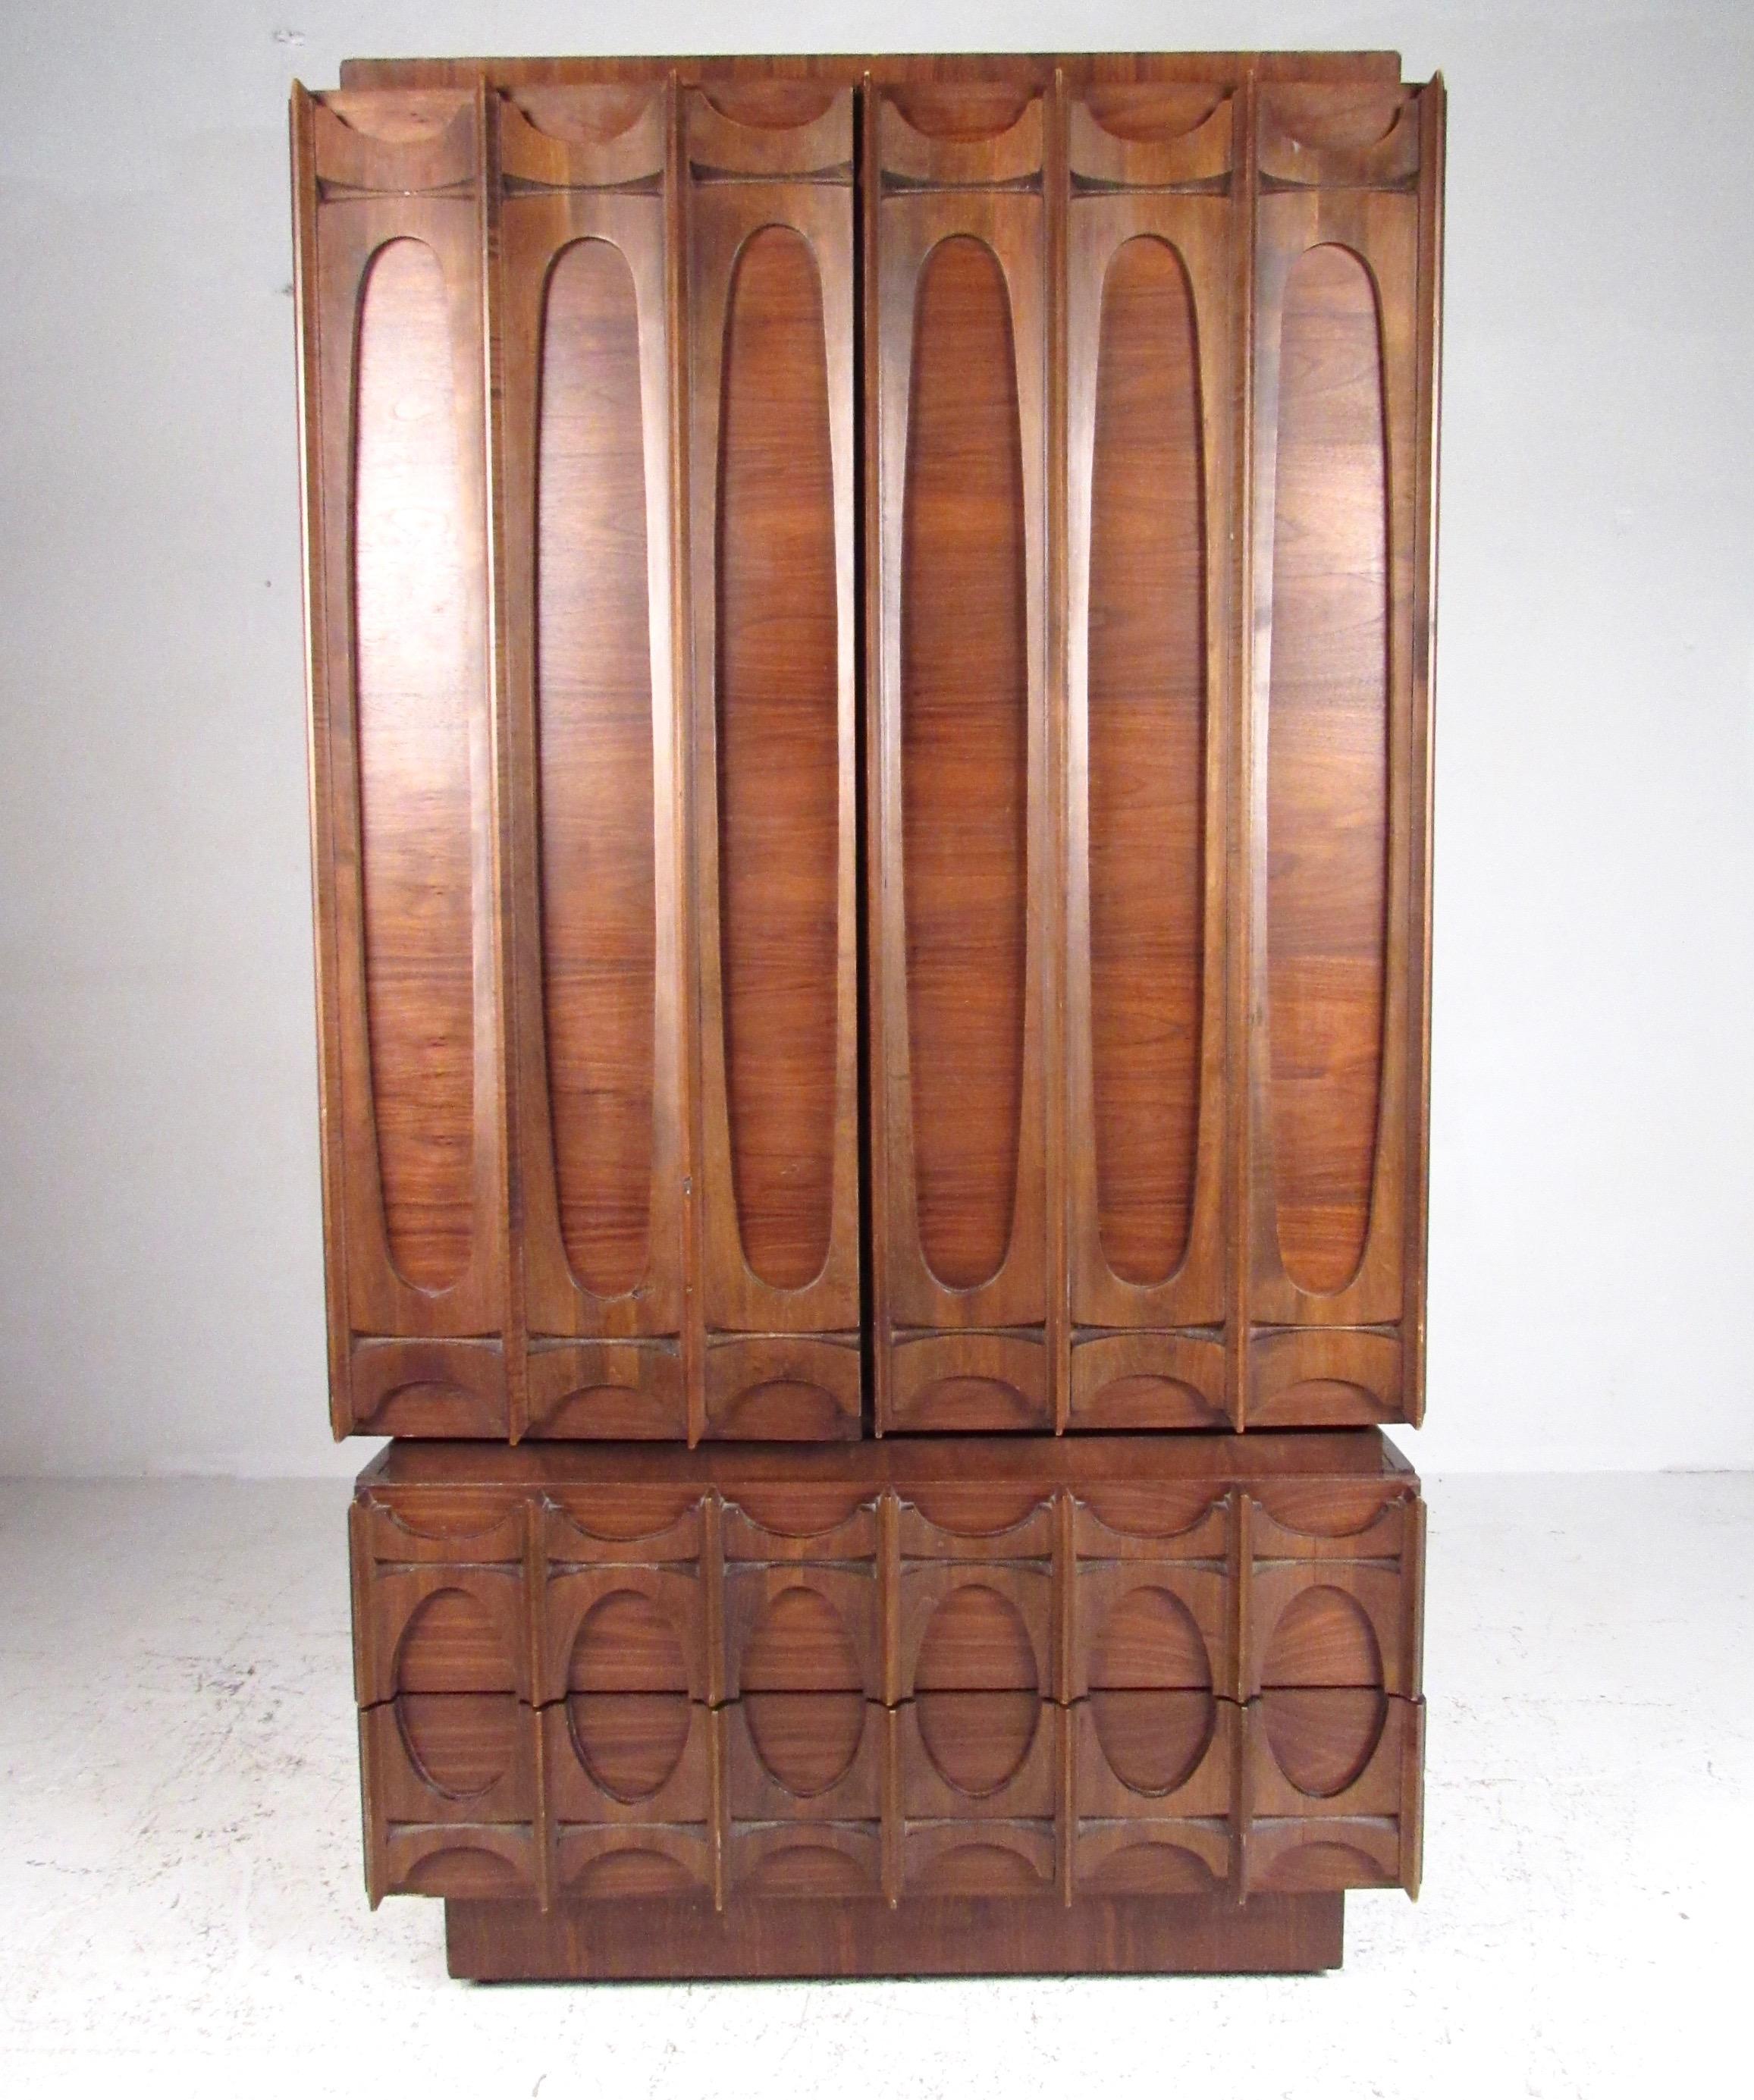 This stylish Brutalist modern armoire makes a striking midcentury addition to any bedroom set. Impressive vintage walnut dresser with spacious drawer and shelf storage for optimal bedroom organization features Brasilia style design. Please confirm